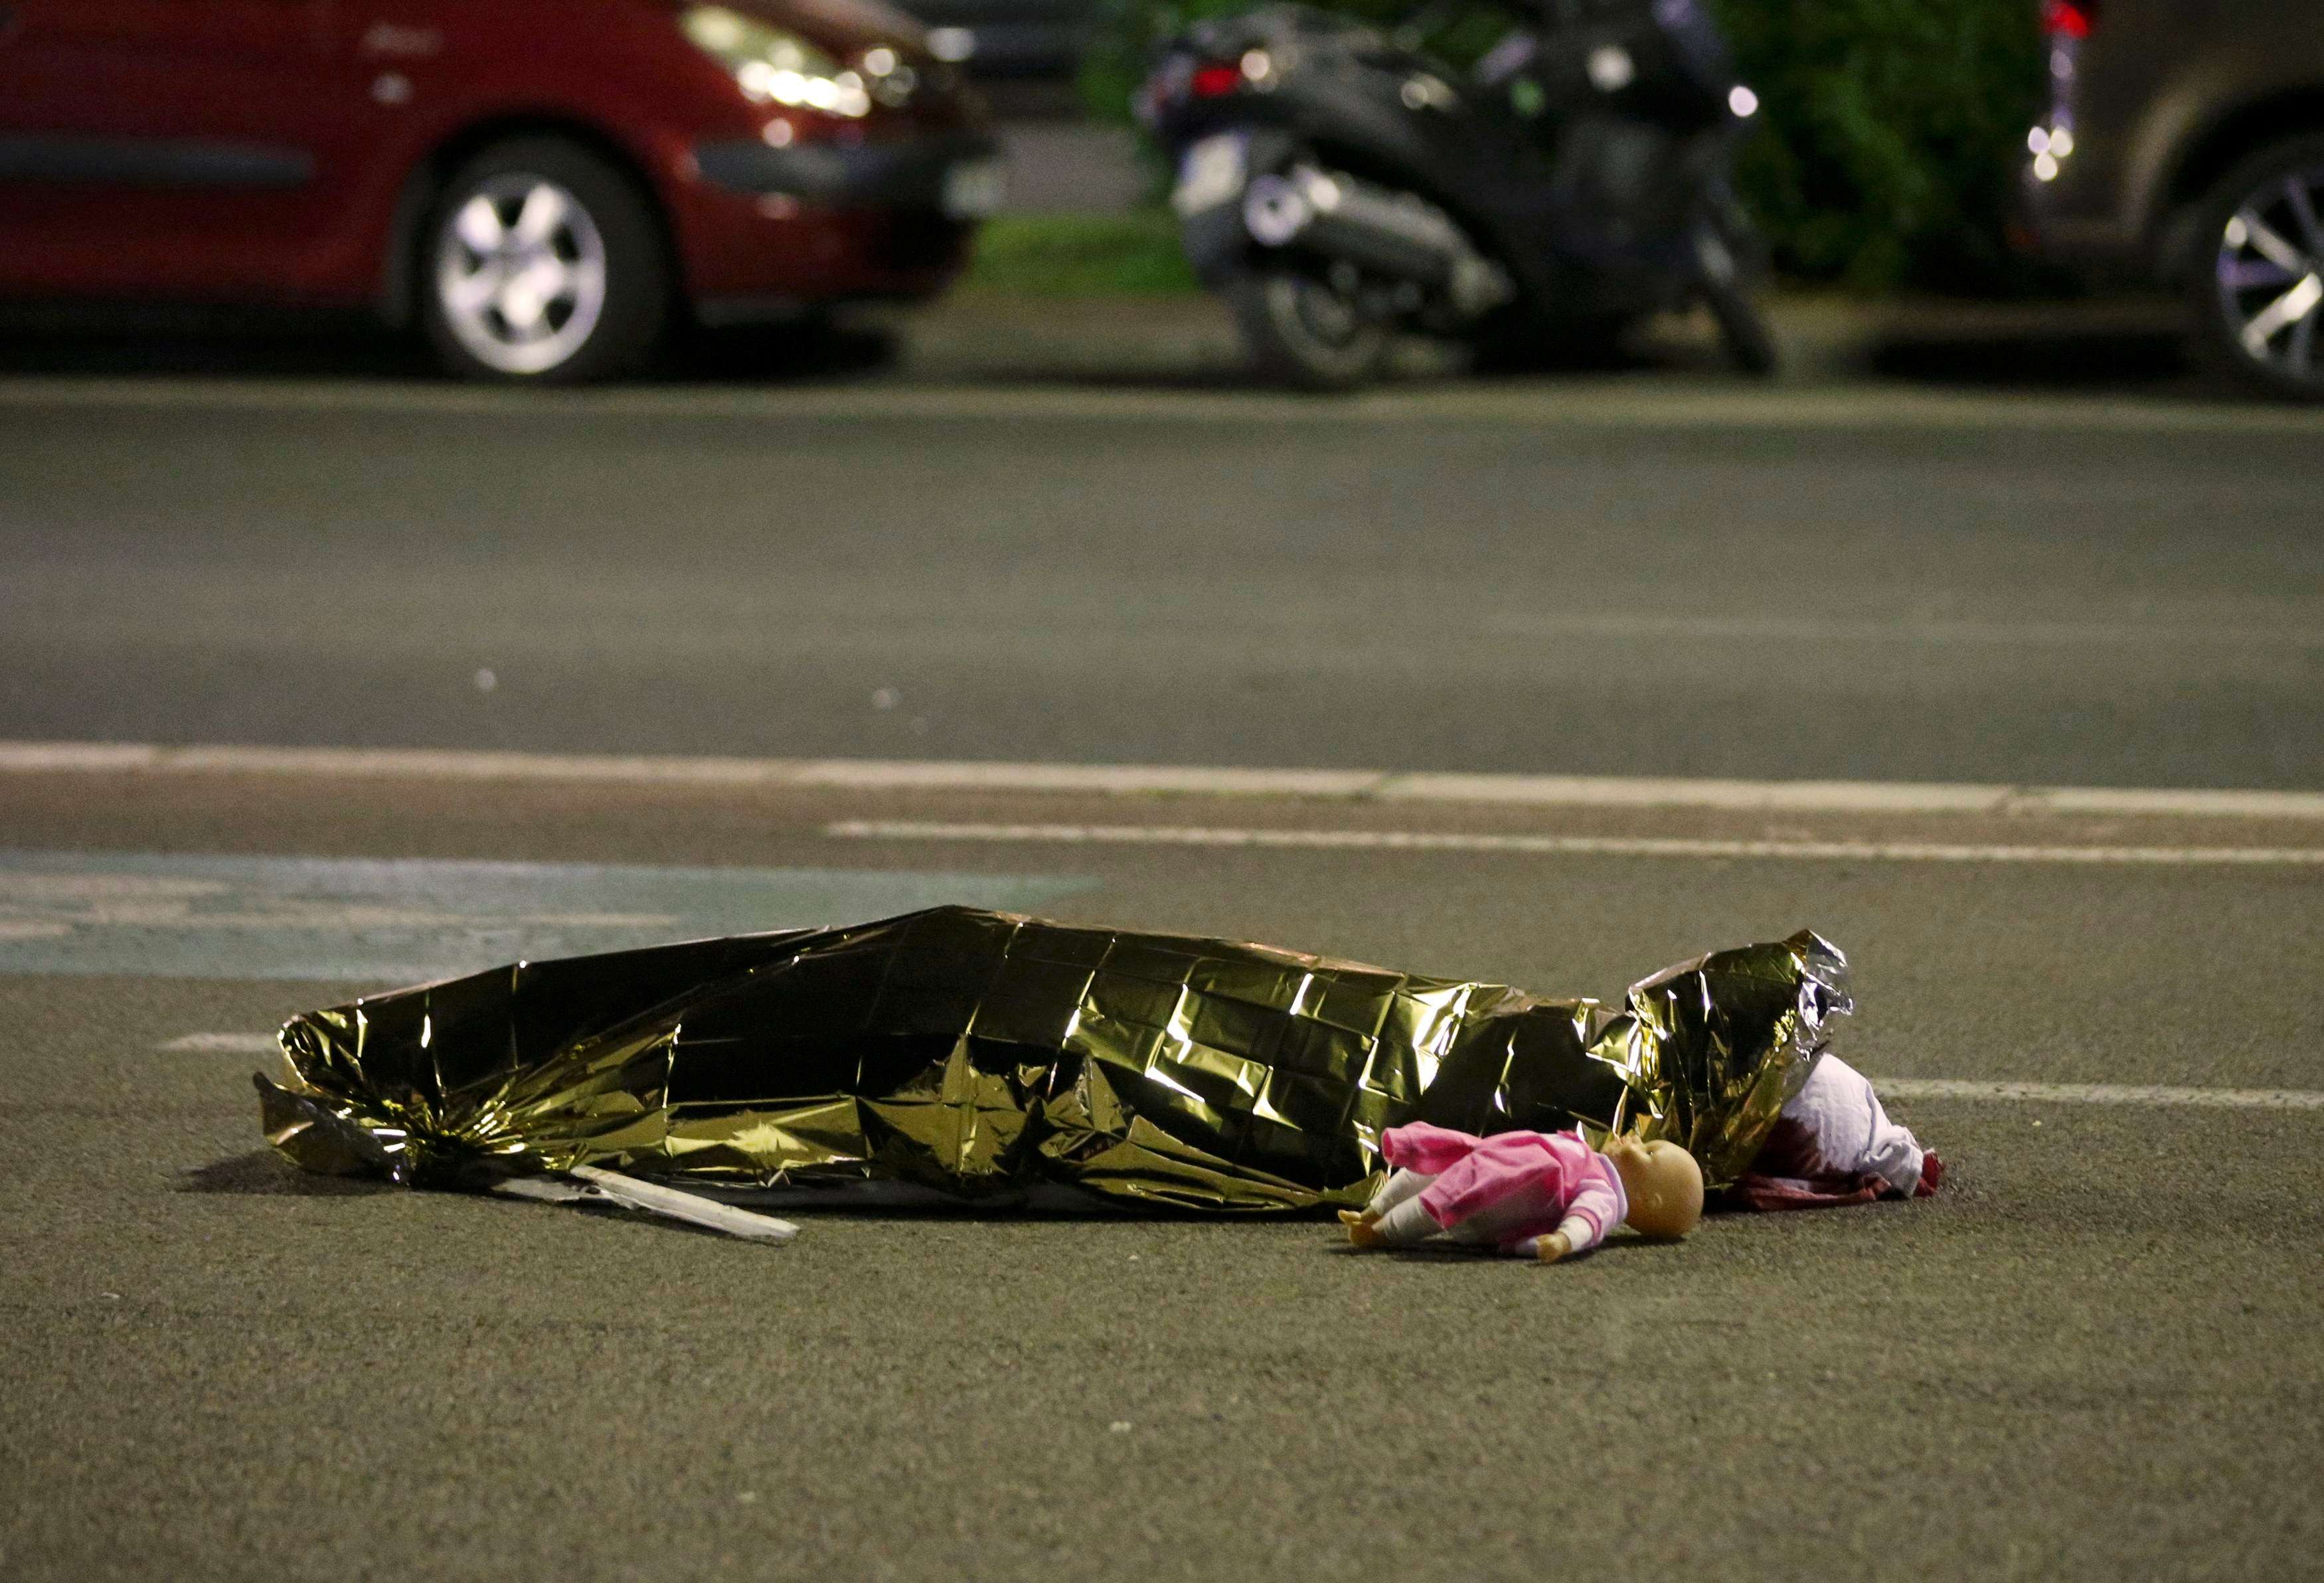 A body believed to be that of a child, a doll at their feet, is wrapped in a foil blanket on the Nice promenade in Thursday night. Photo: Reuters